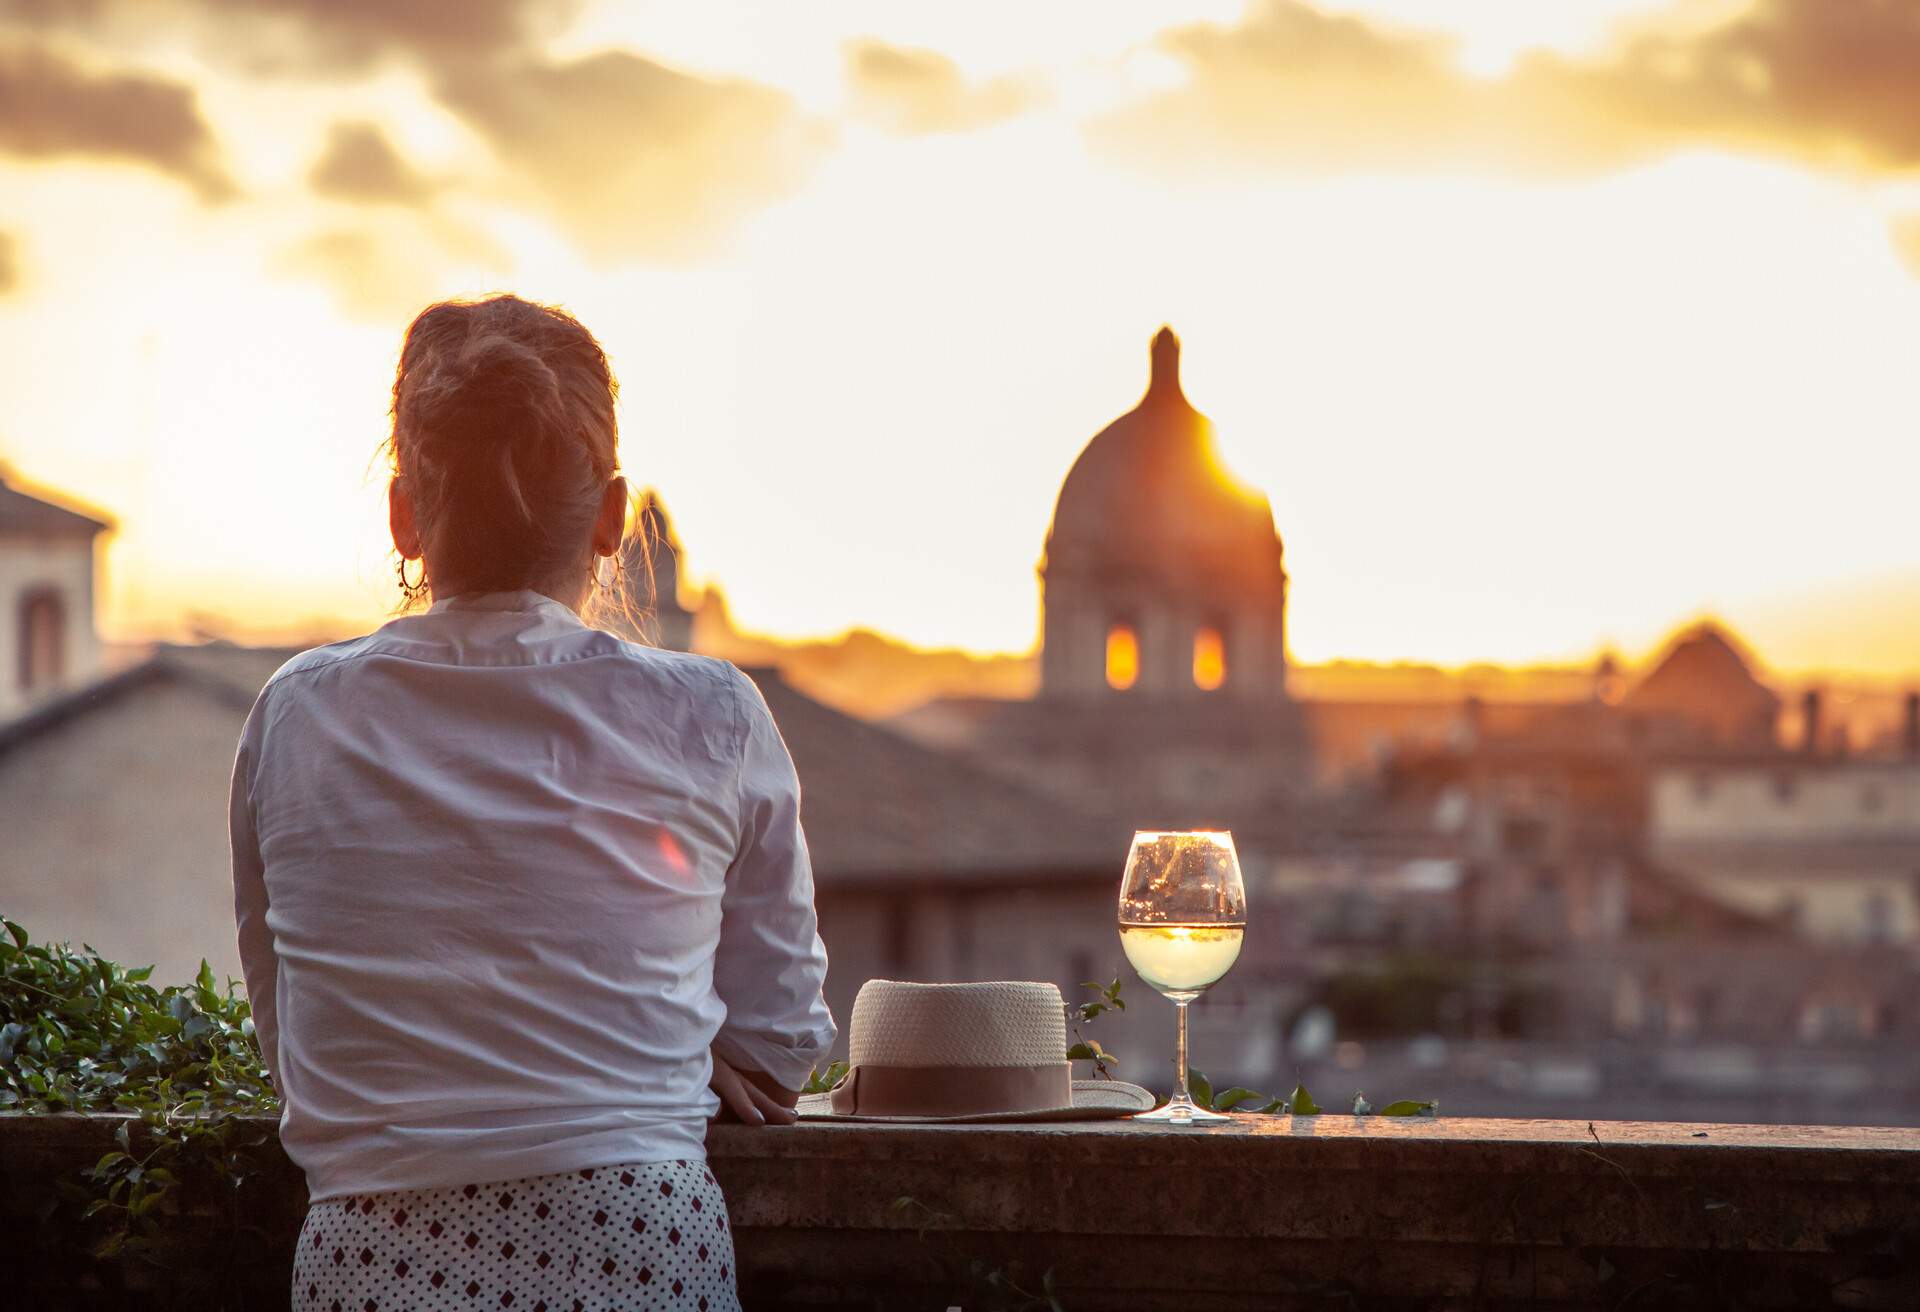 dest_italy_rome_roof_terrace_theme_people_drink_bar_gettyimages-1172748104_universal_within-usage-period_83624.jpg